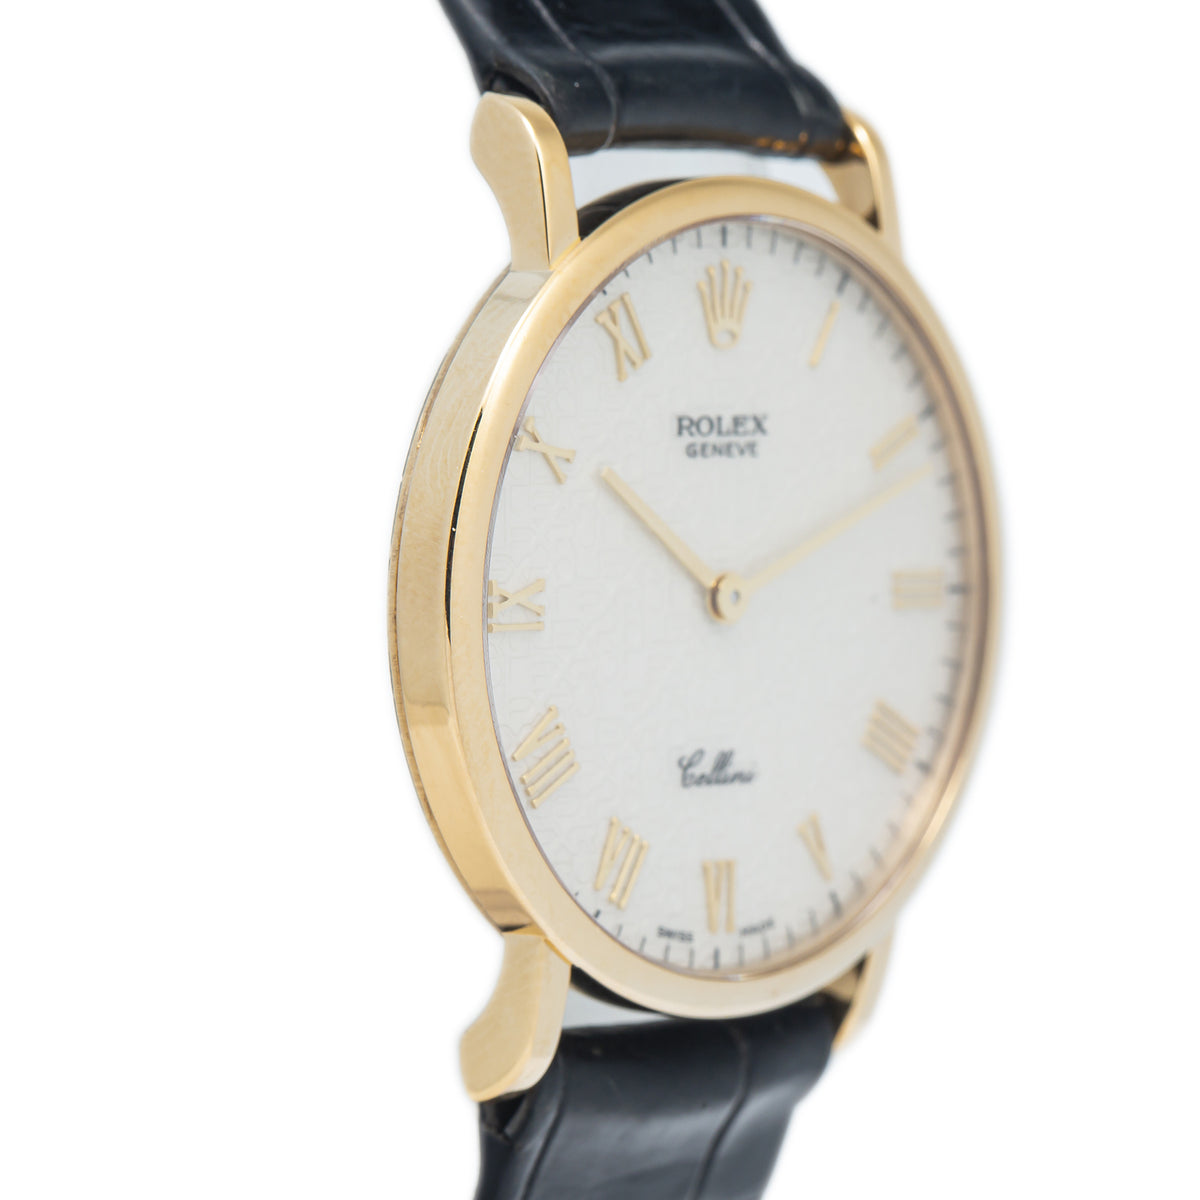 Rolex Cellini 5112 18k Yellow Gold White Dial Manual Hand Wind Watch 32mm